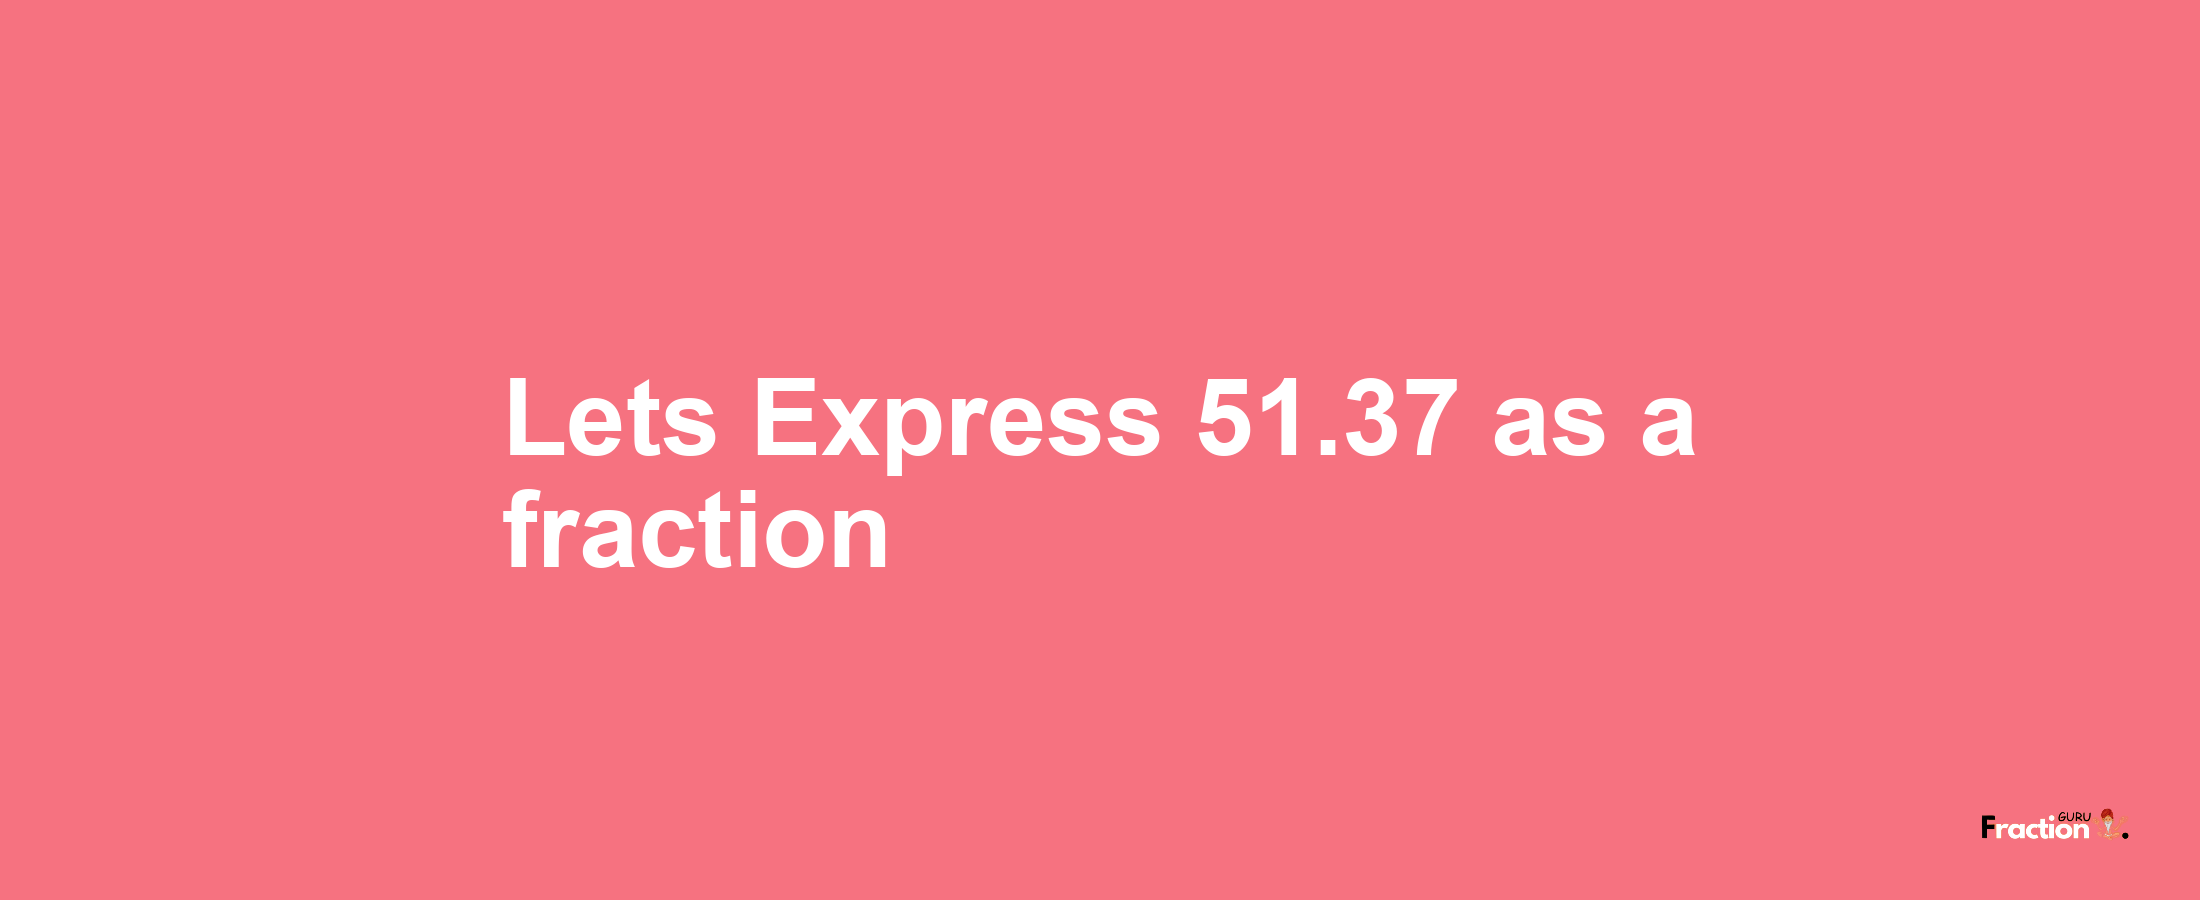 Lets Express 51.37 as afraction